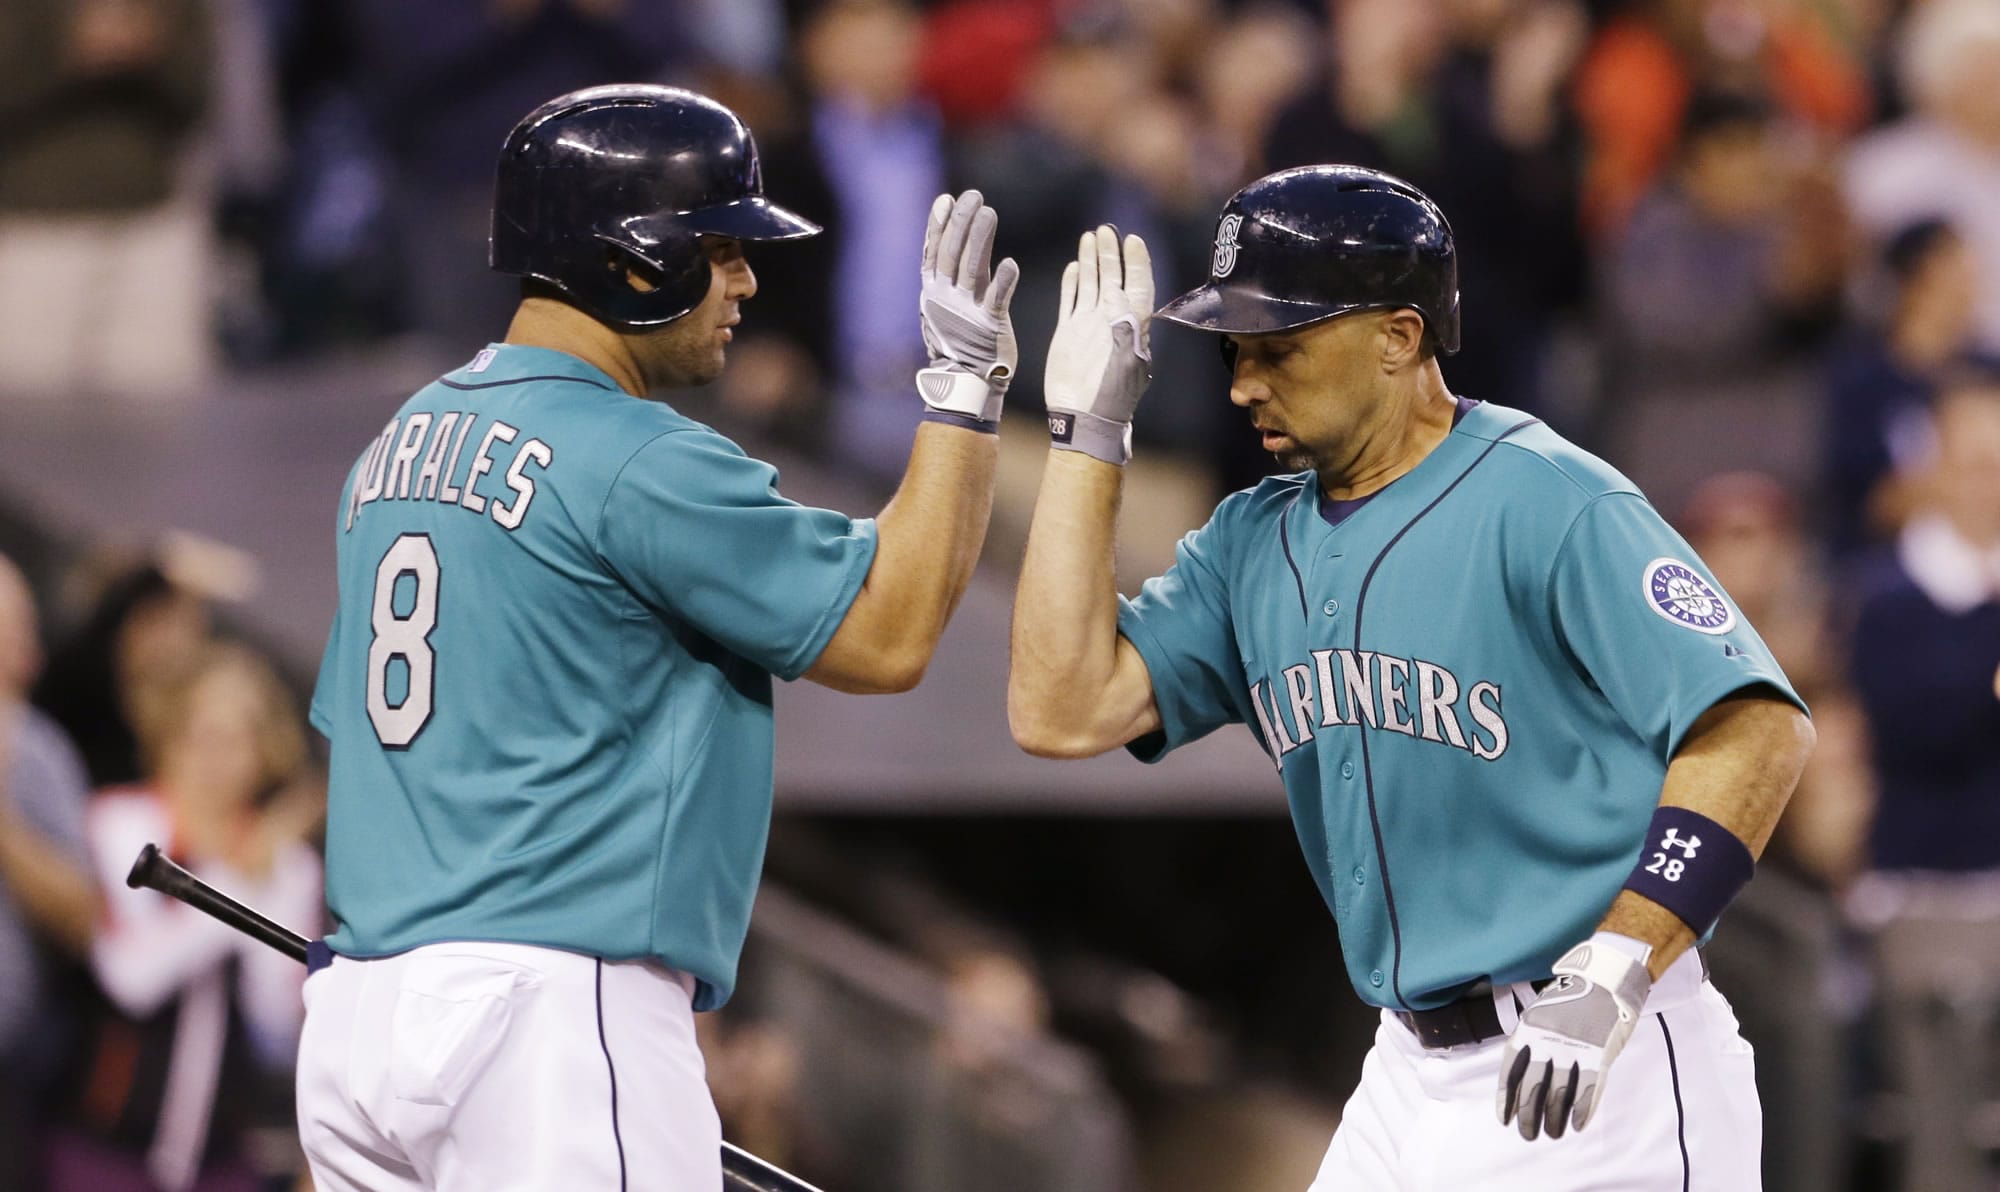 Seattle Mariners' Raul Ibanez, right, is congratulated by on-deck batter Kendrys Morales after Ibanez' home run against the Los Angeles Angels in the sevent inning of a baseball game Friday, July 12, 2013, in Seattle. Morales homered on his turn.